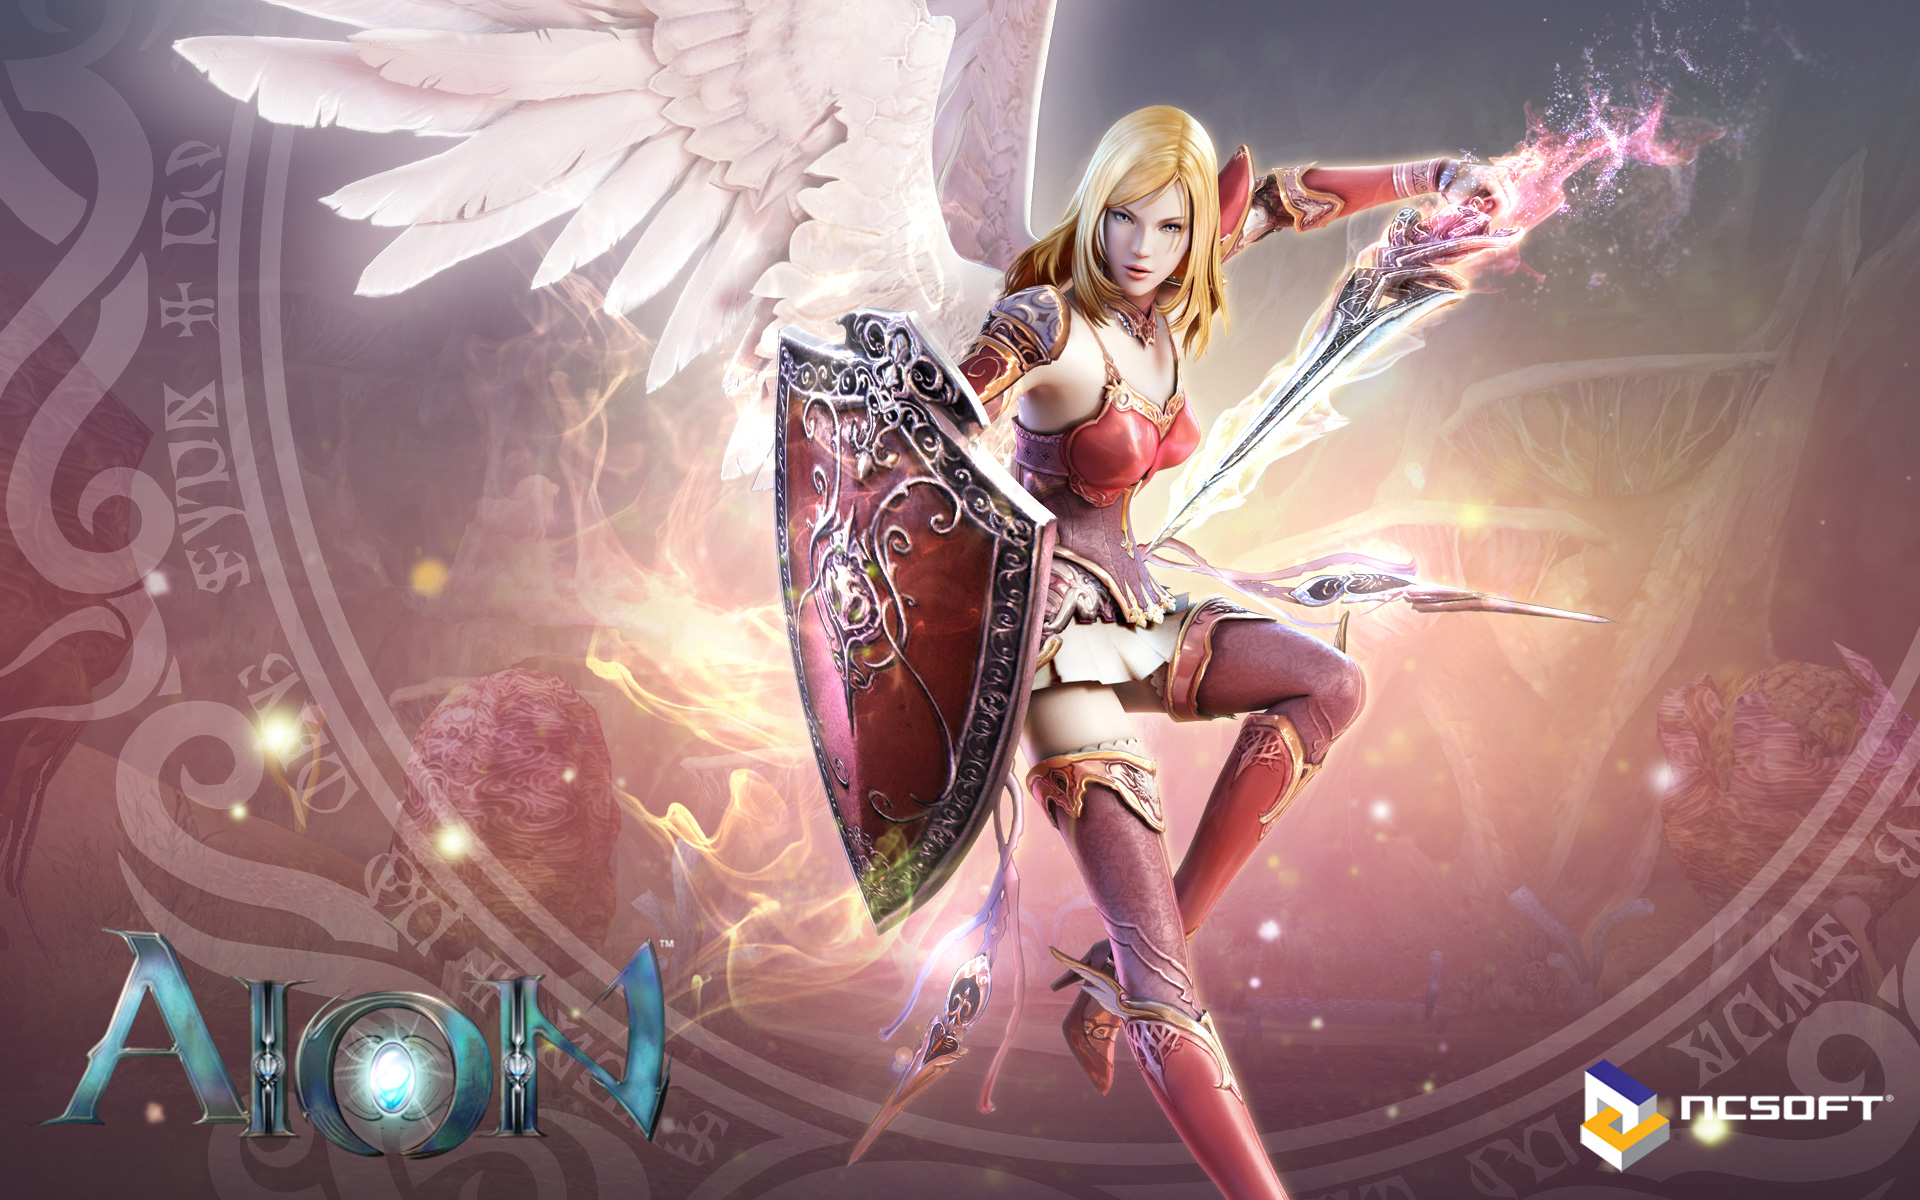 Top aion online wallpaper Download   Wallpapers Book   Your 1920x1200